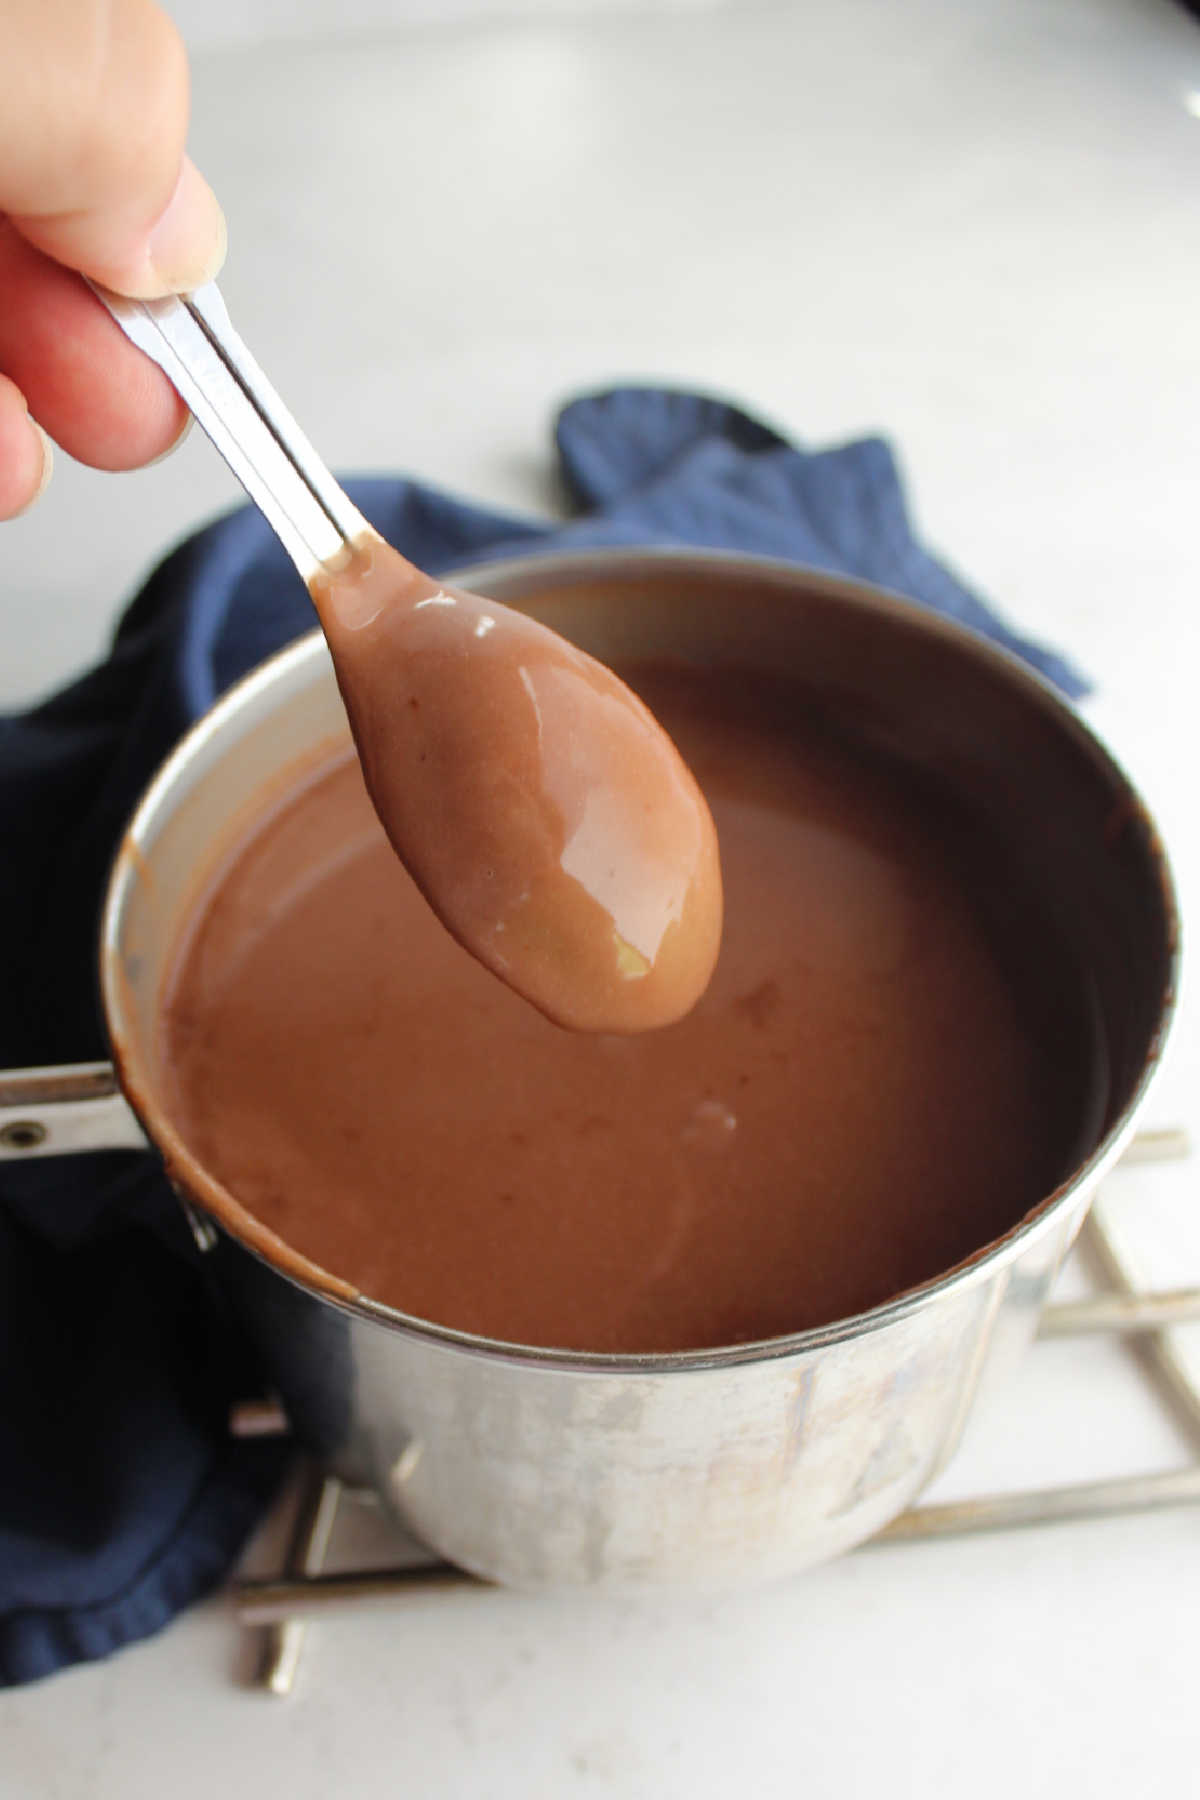 Warm thickened chocolate pudding coating the back of a spoon.